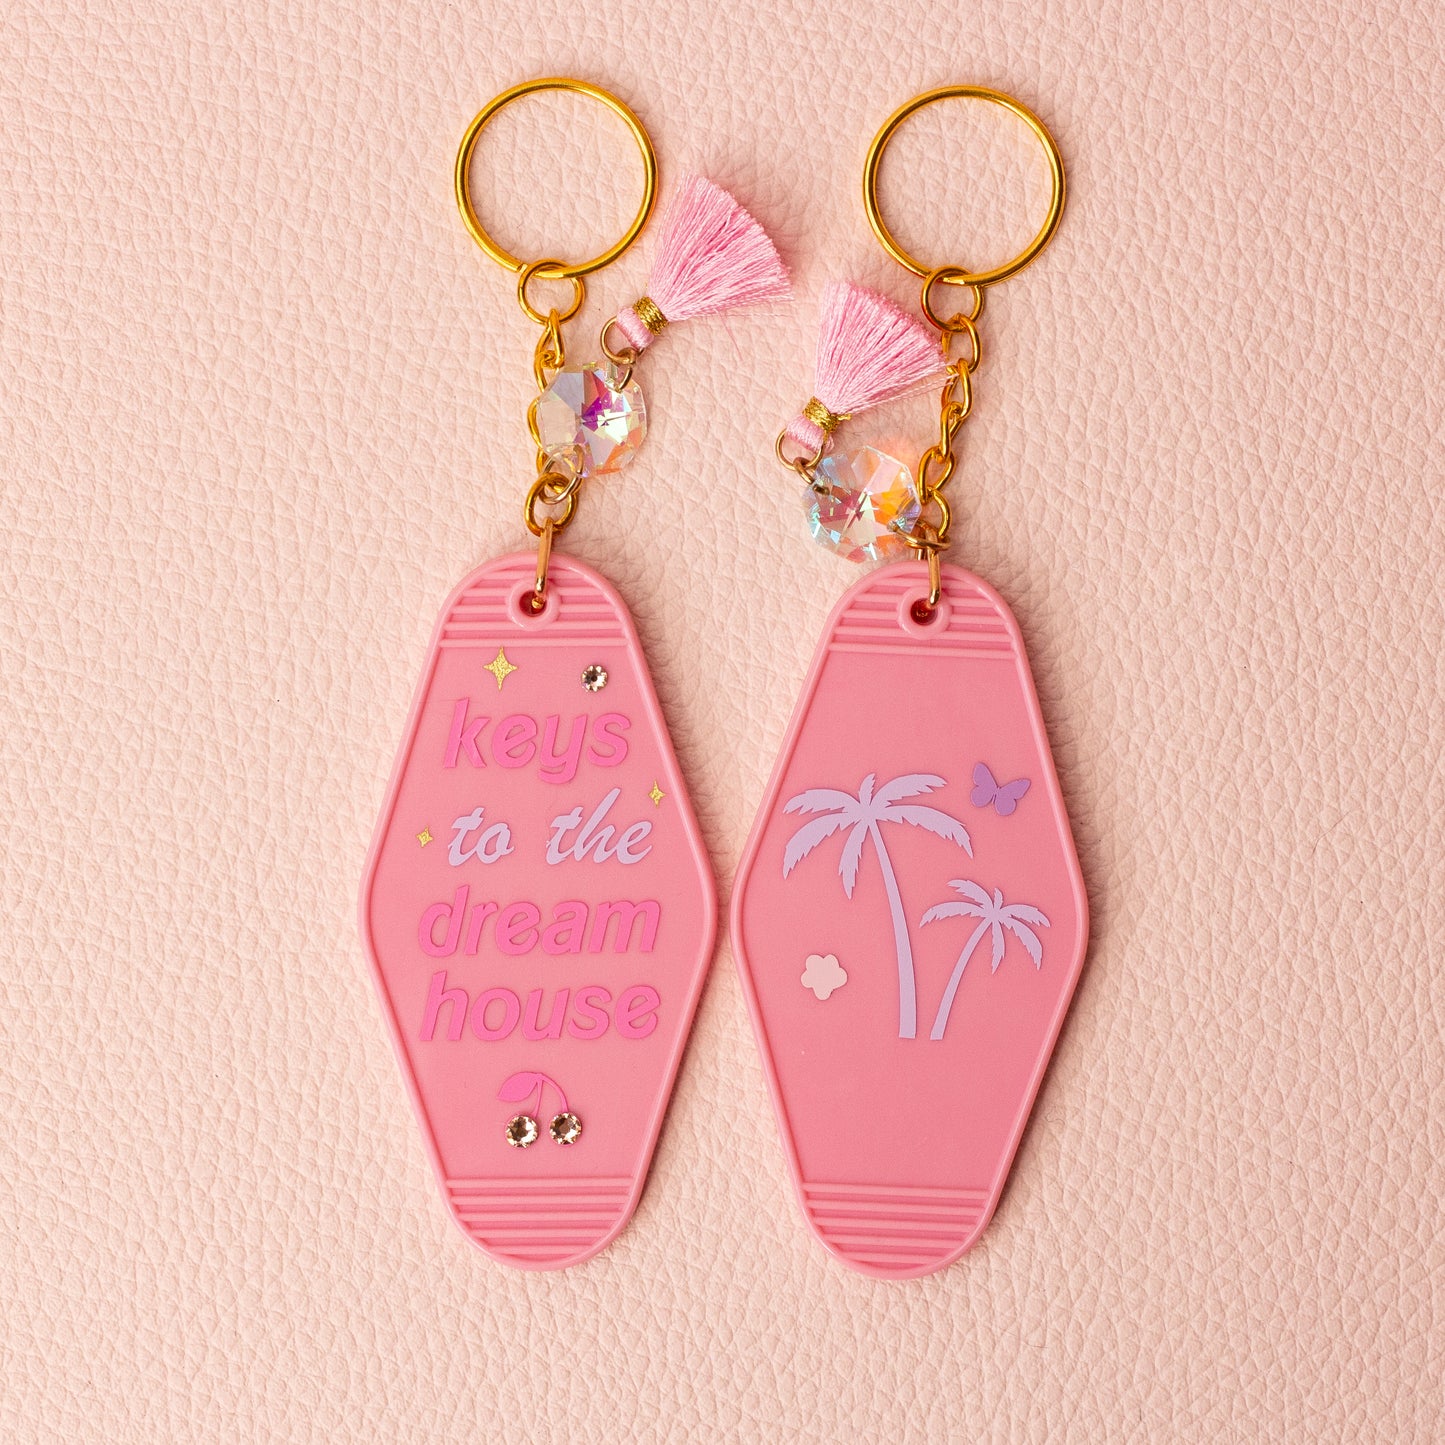 💎 'Keys to the Dream House' Barbie-Inspired Keychain with Crystal Cherry